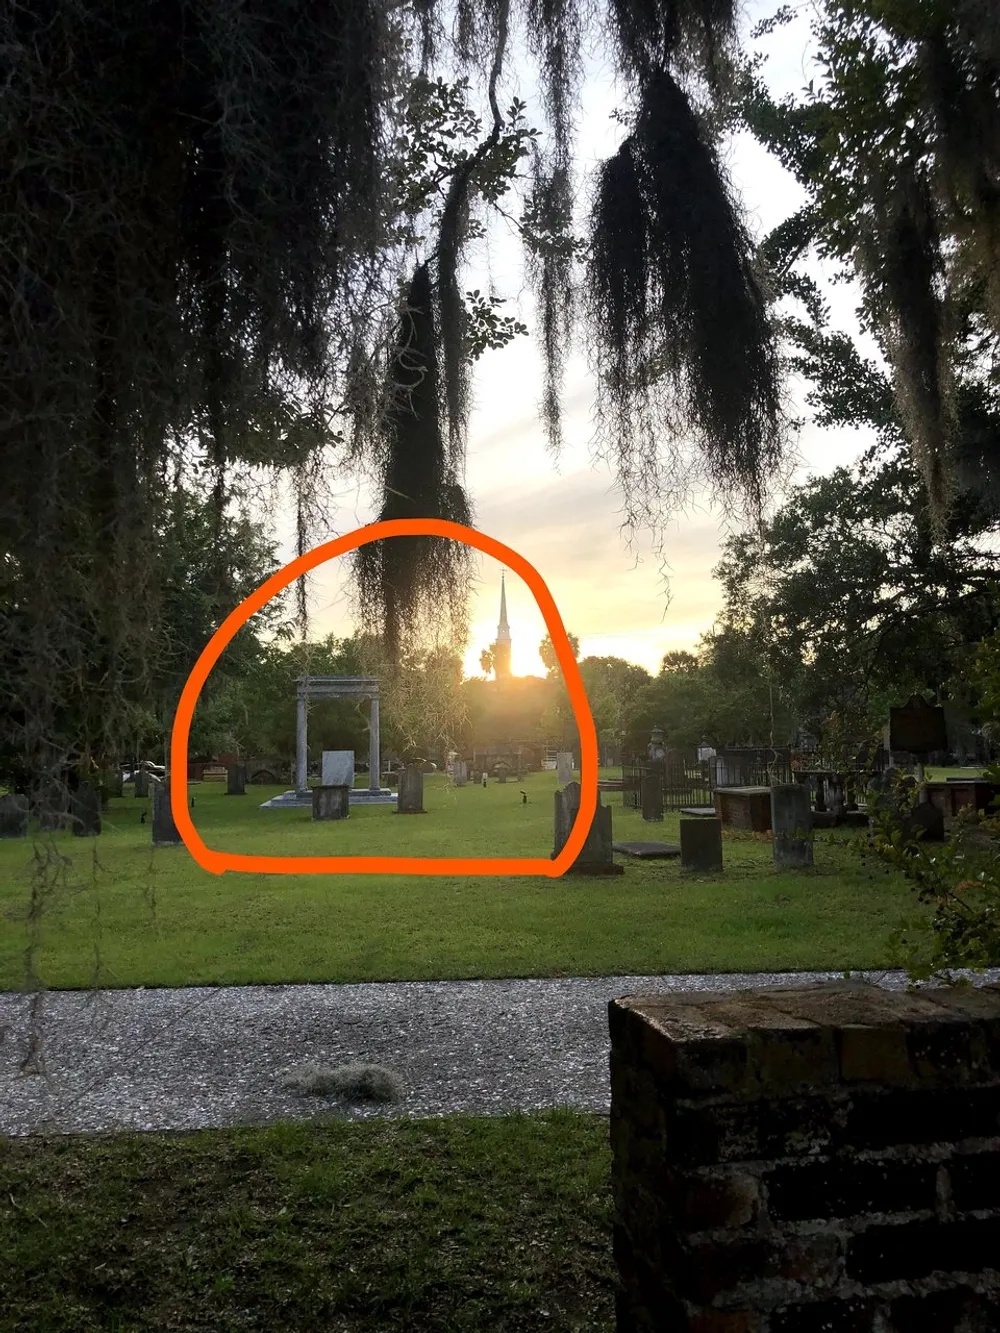 The image captures a serene sunset with golden rays filtering through the trees highlighting a peaceful cemetery surrounded by hanging Spanish moss with an orange outline focusing on a particular area within the scene